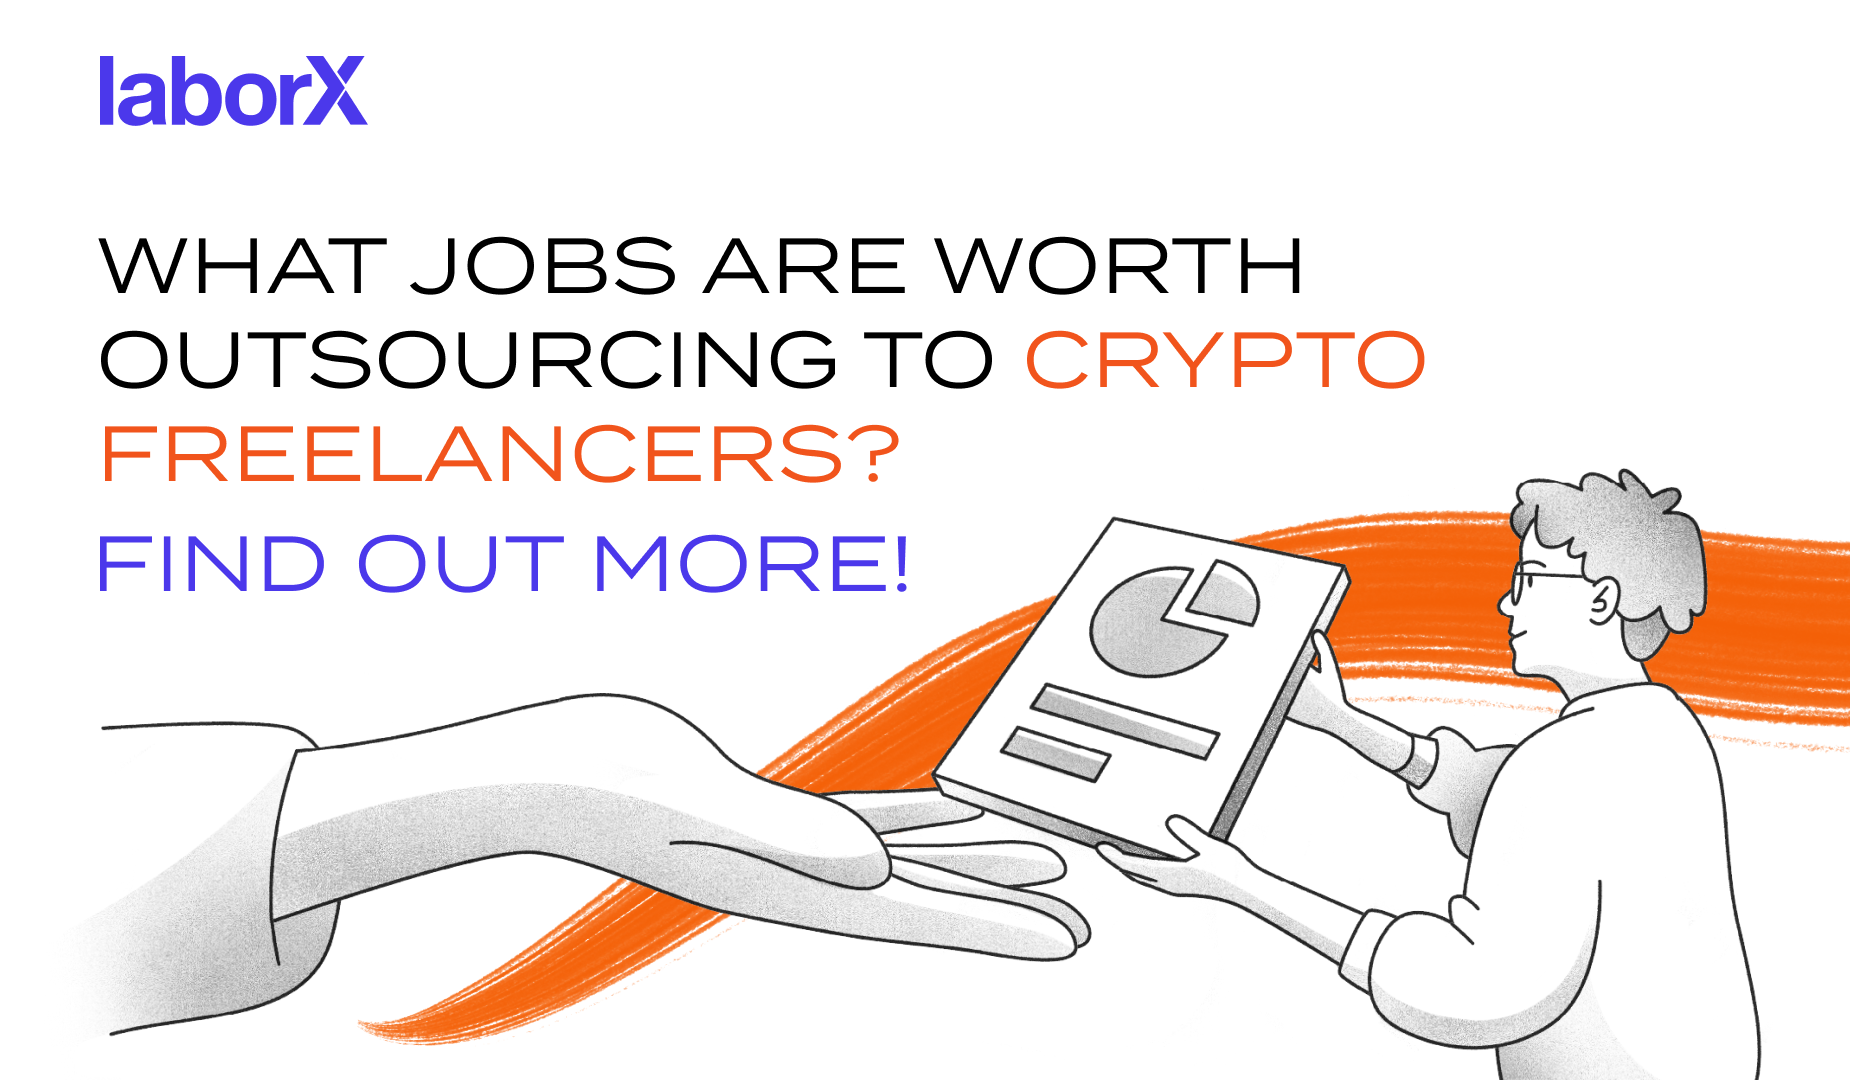 What Jobs Can You Outsource To Crypto Freelancers?